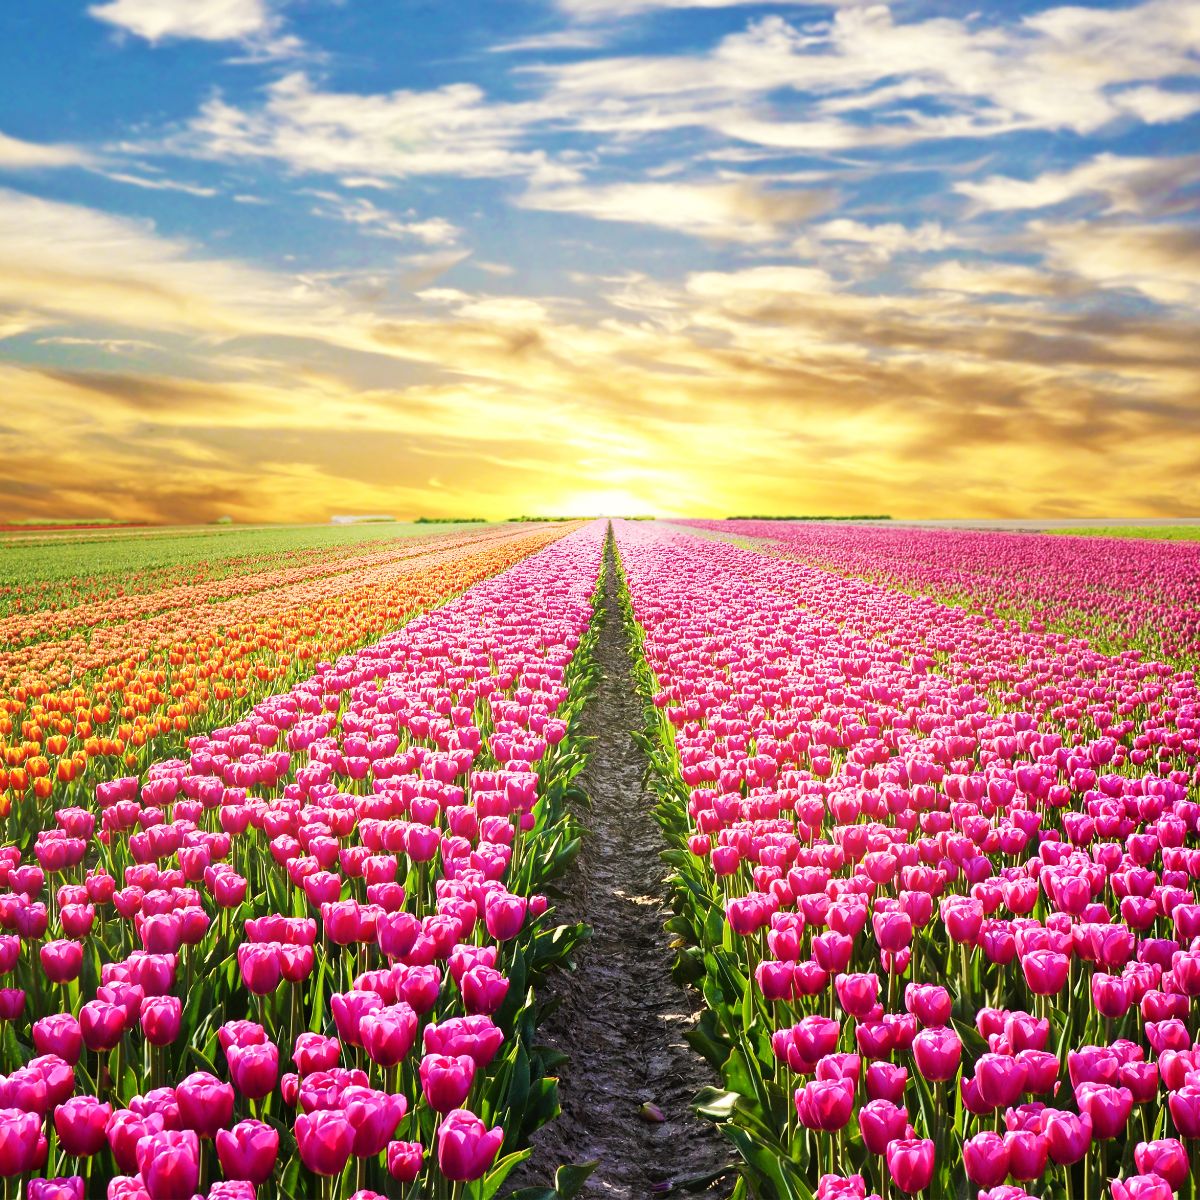 What is the spiritual meaning of tulip flowers